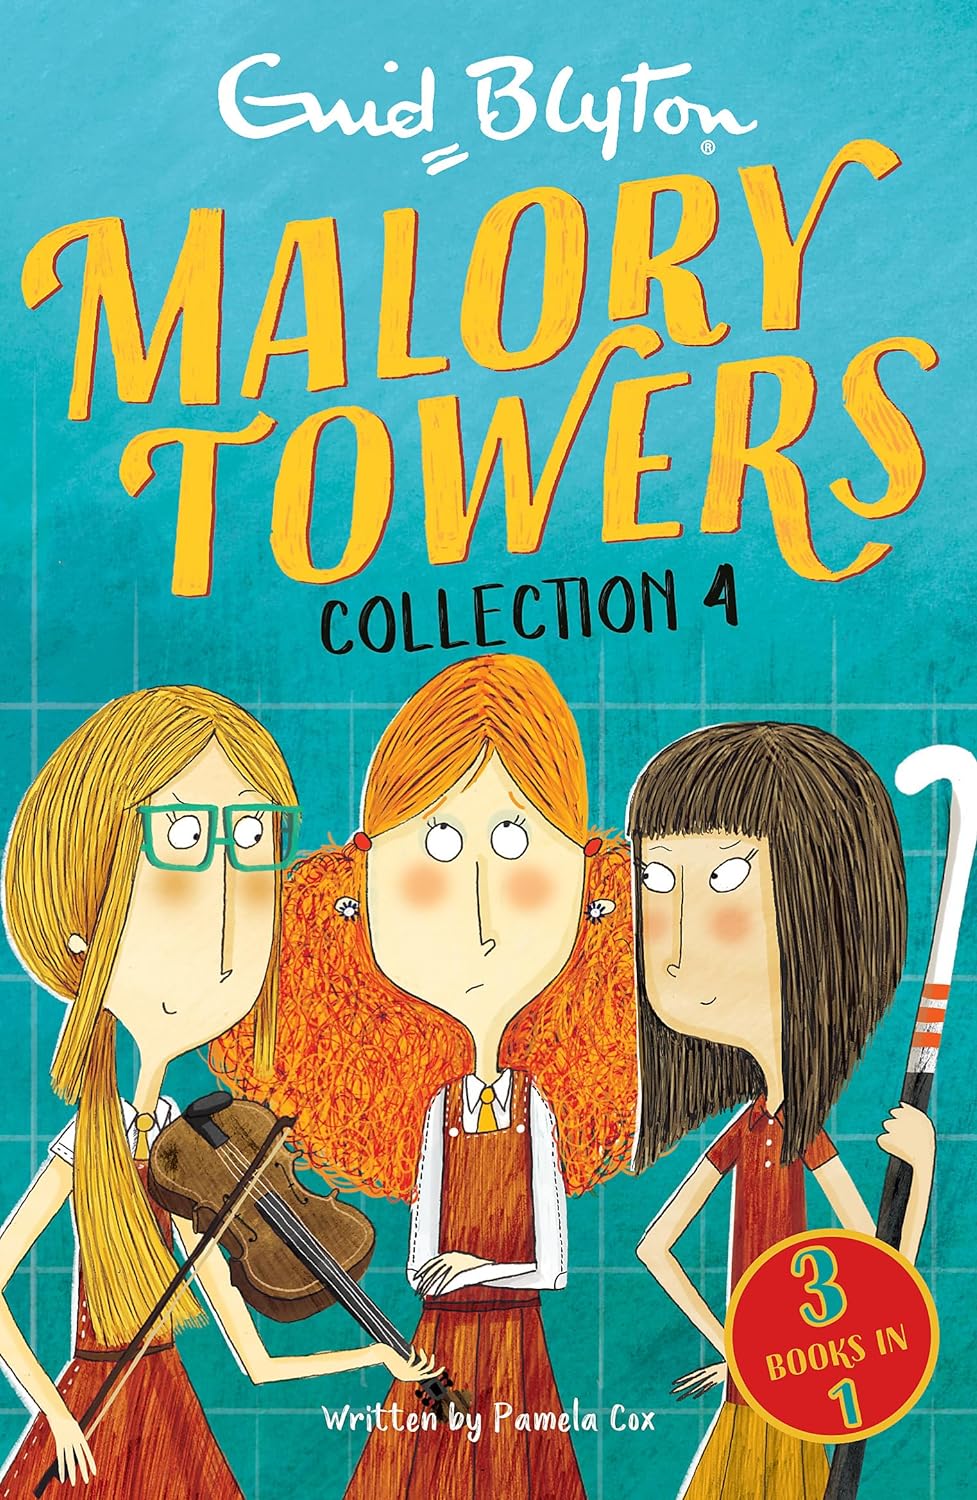 MALORY TOWERS COLLECTION 4 3 BOOKS In 1